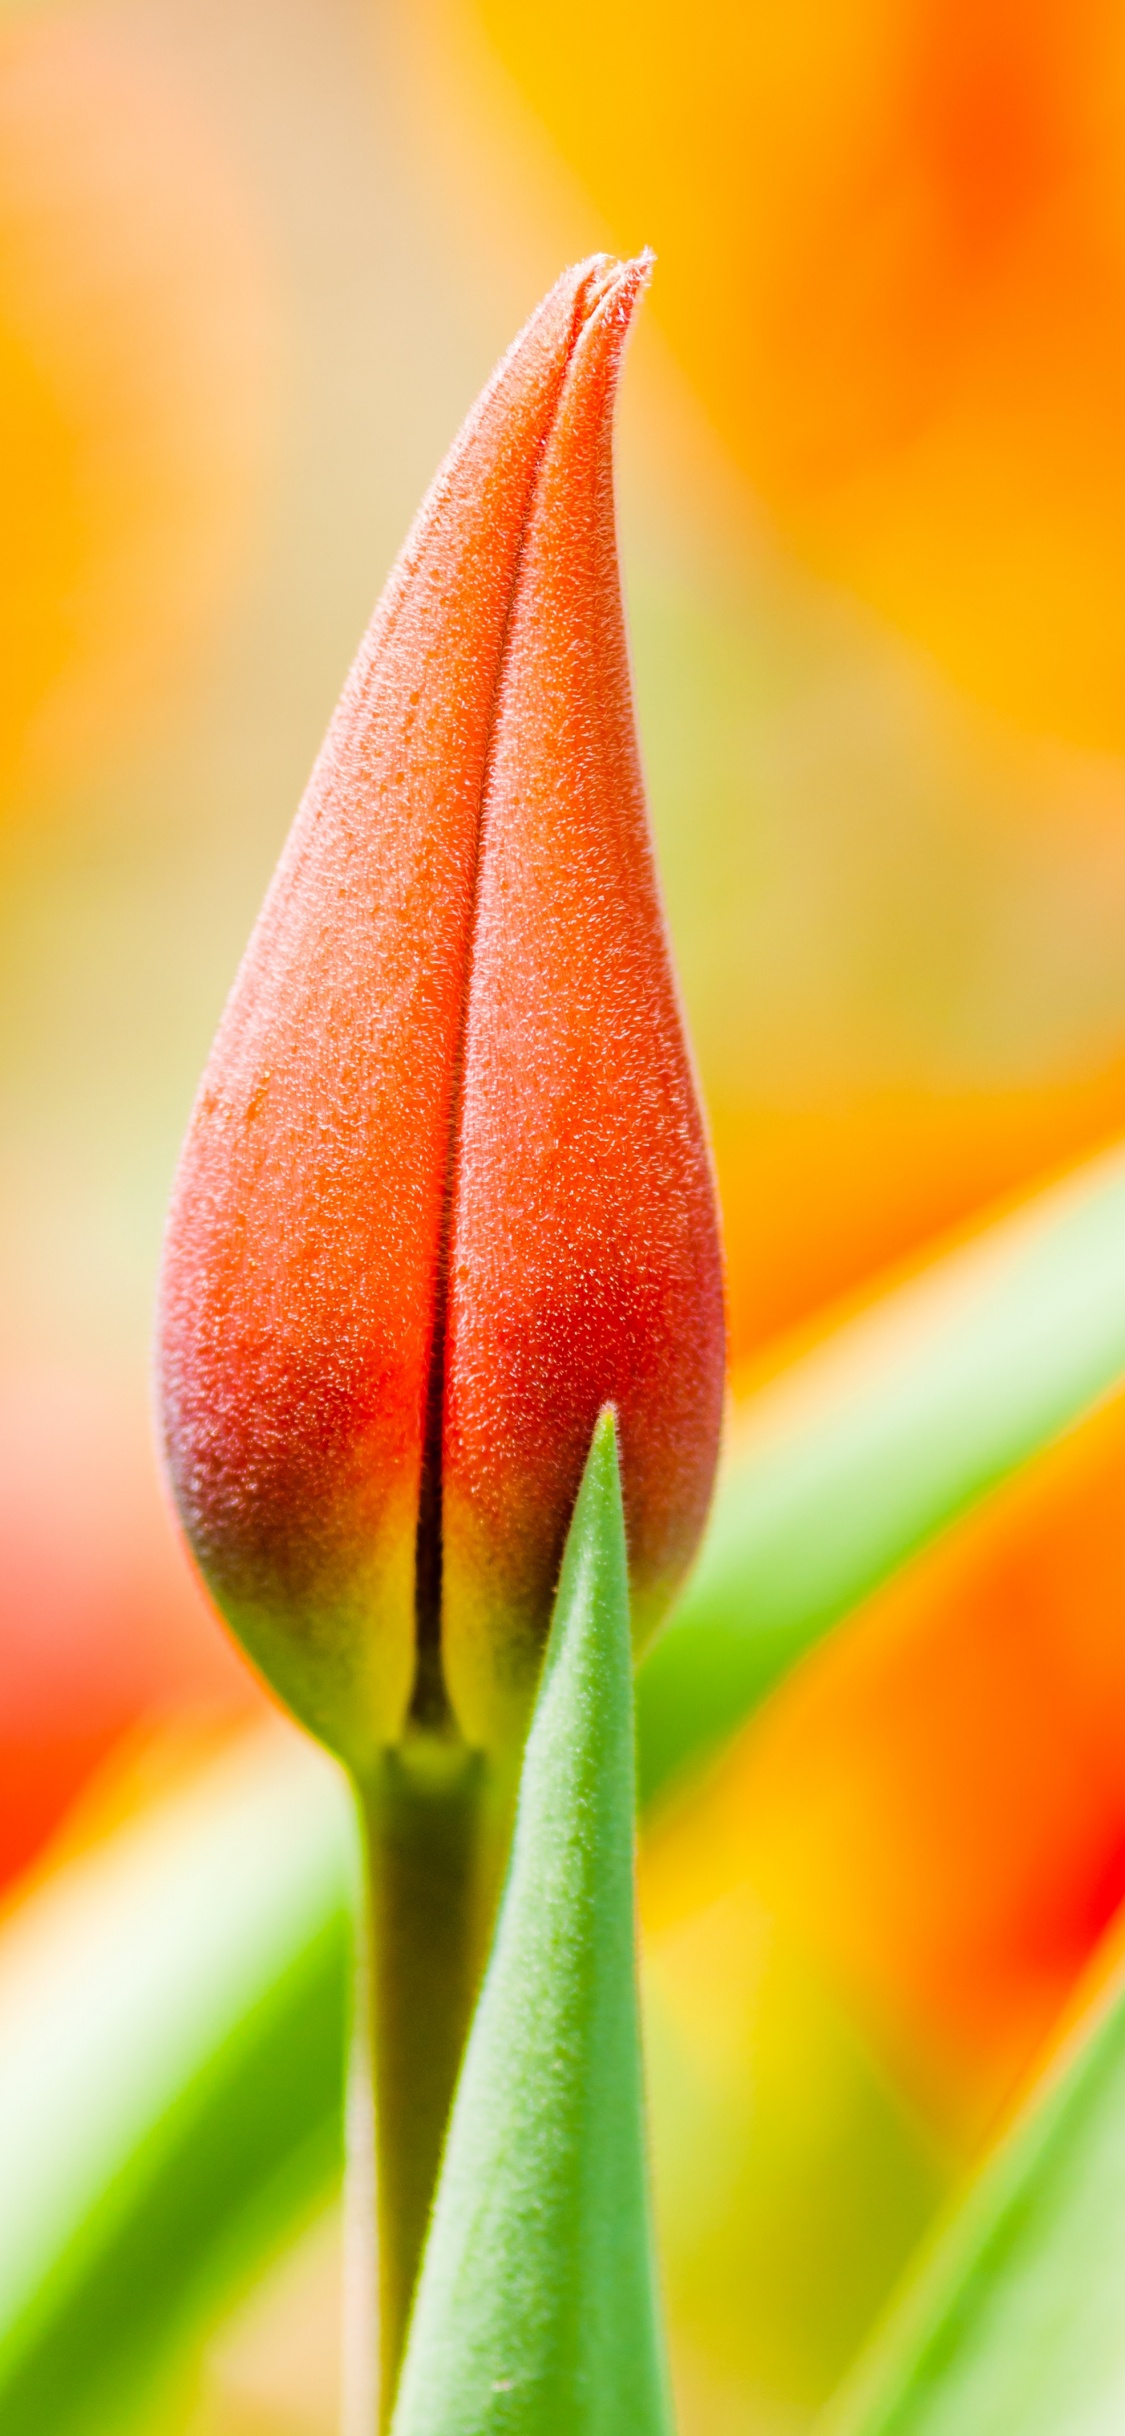 Red and Yellow Tulip in Bloom Close up Photo. Wallpaper in 1125x2436 Resolution